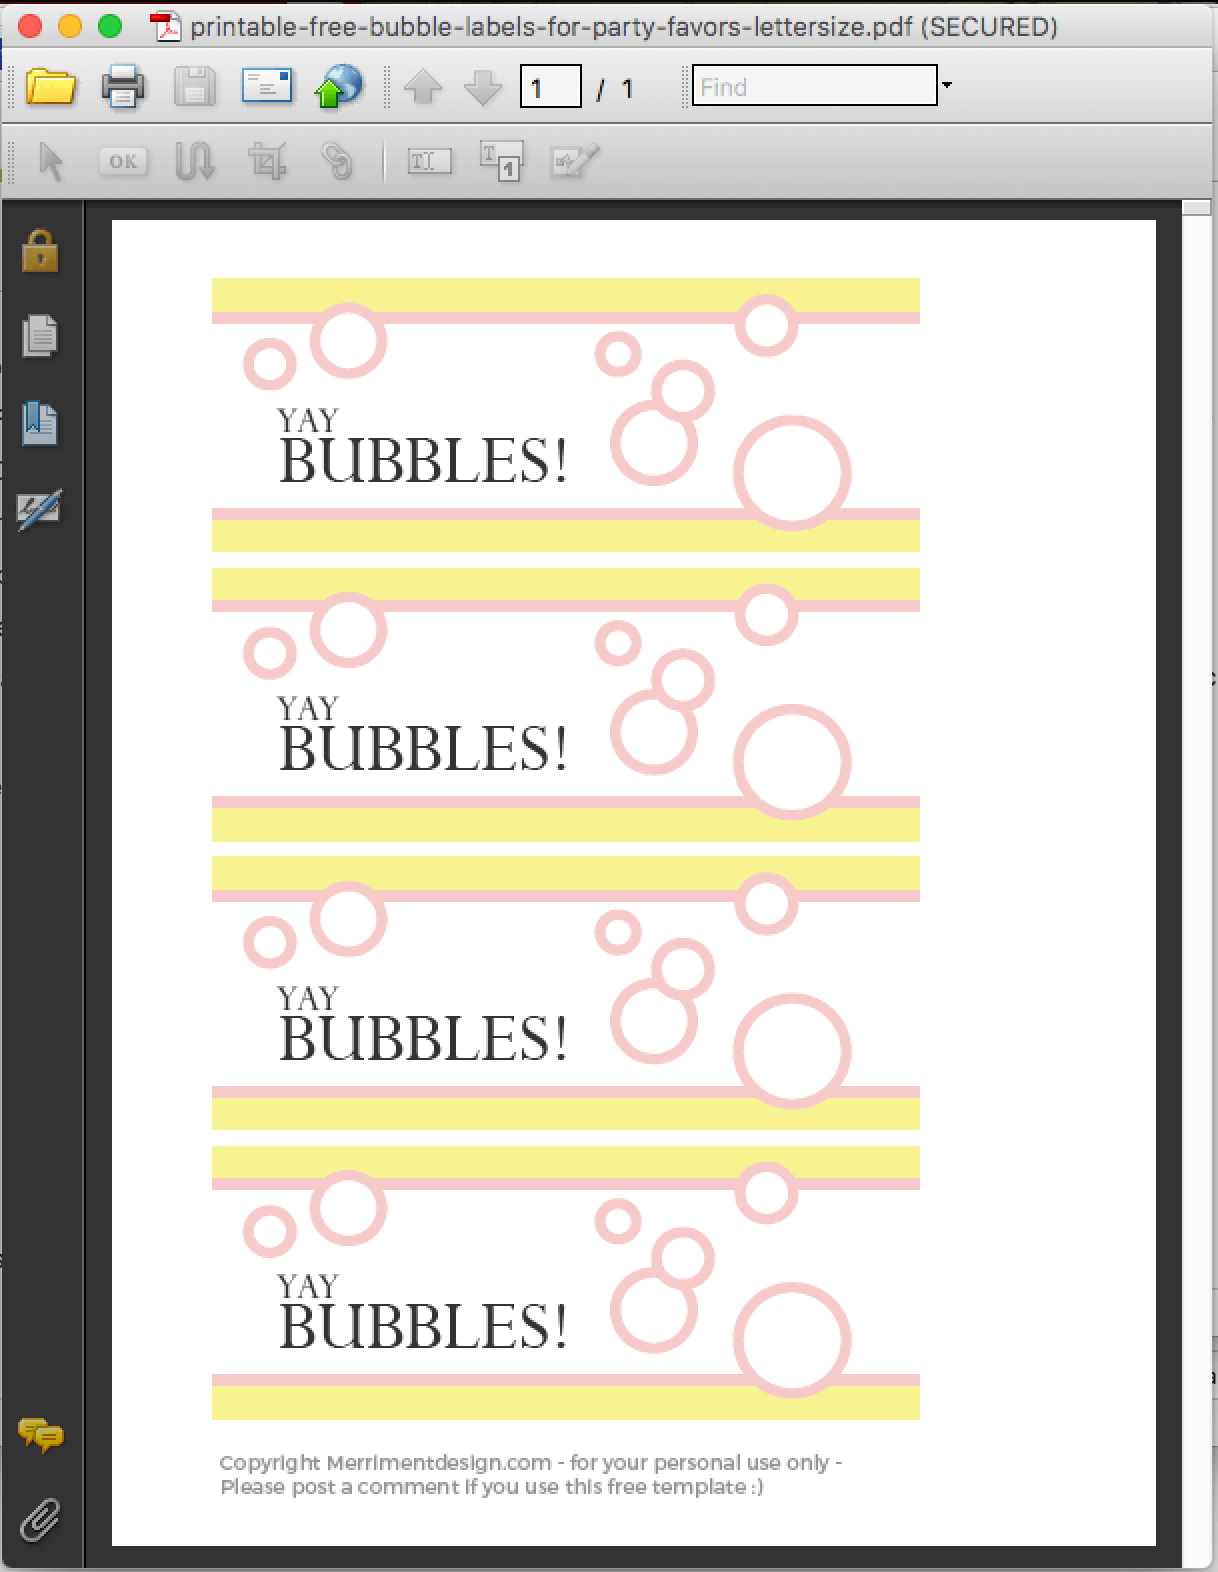 Printable Free Bubble Labels For Party Favors - Merriment Design - Free Printable Gift Tags For Bubbles